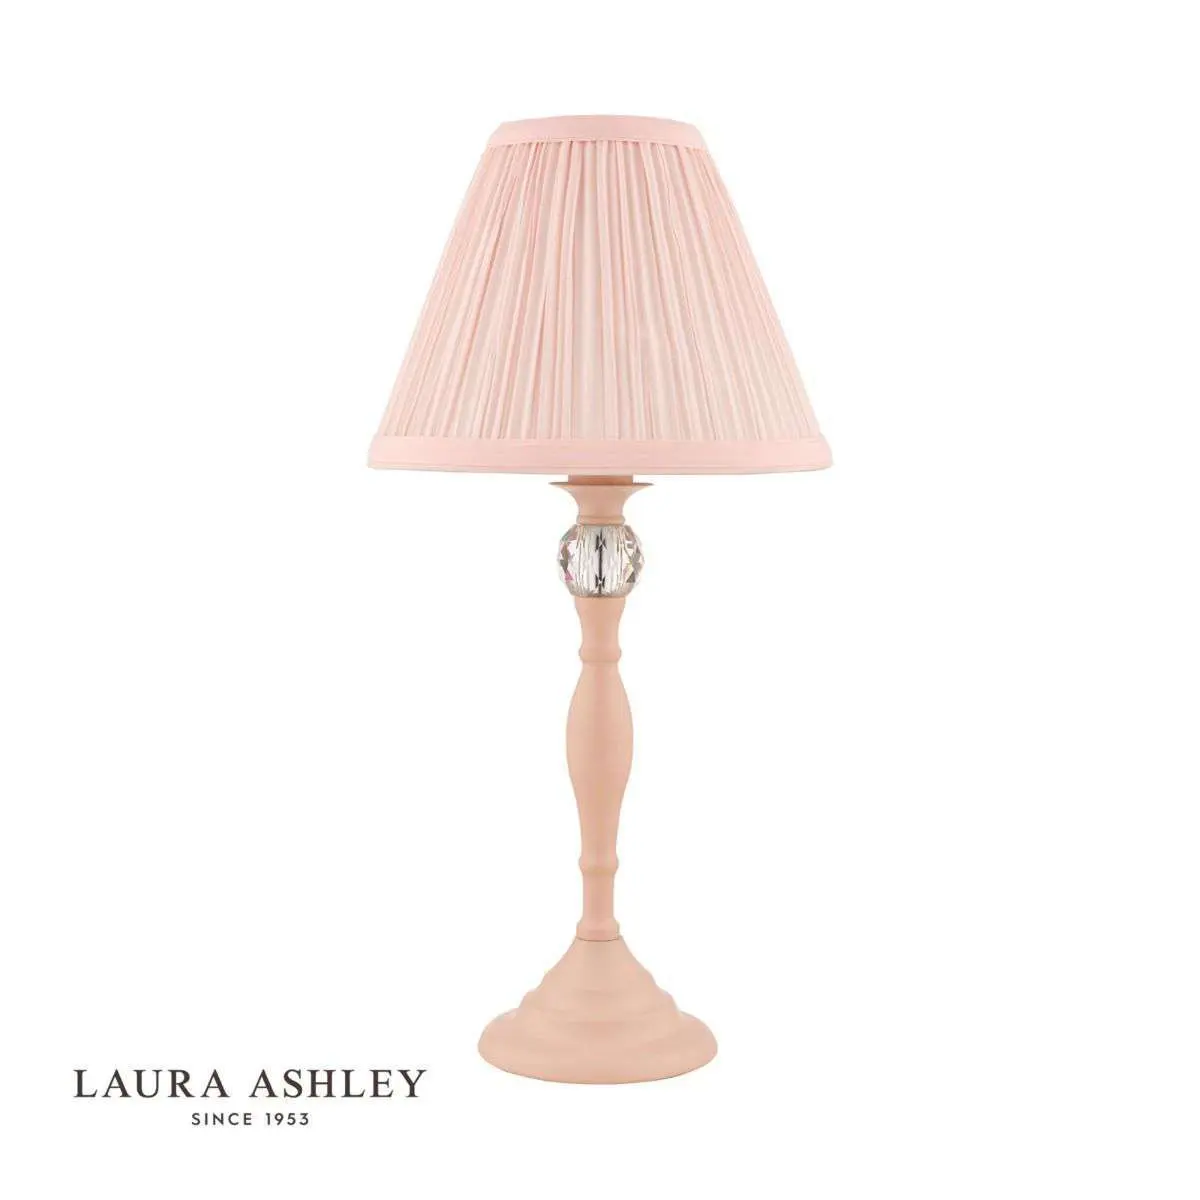 Laura Ashley Ellis Satin-Painted Spindle Table Lamp with Blush Shade